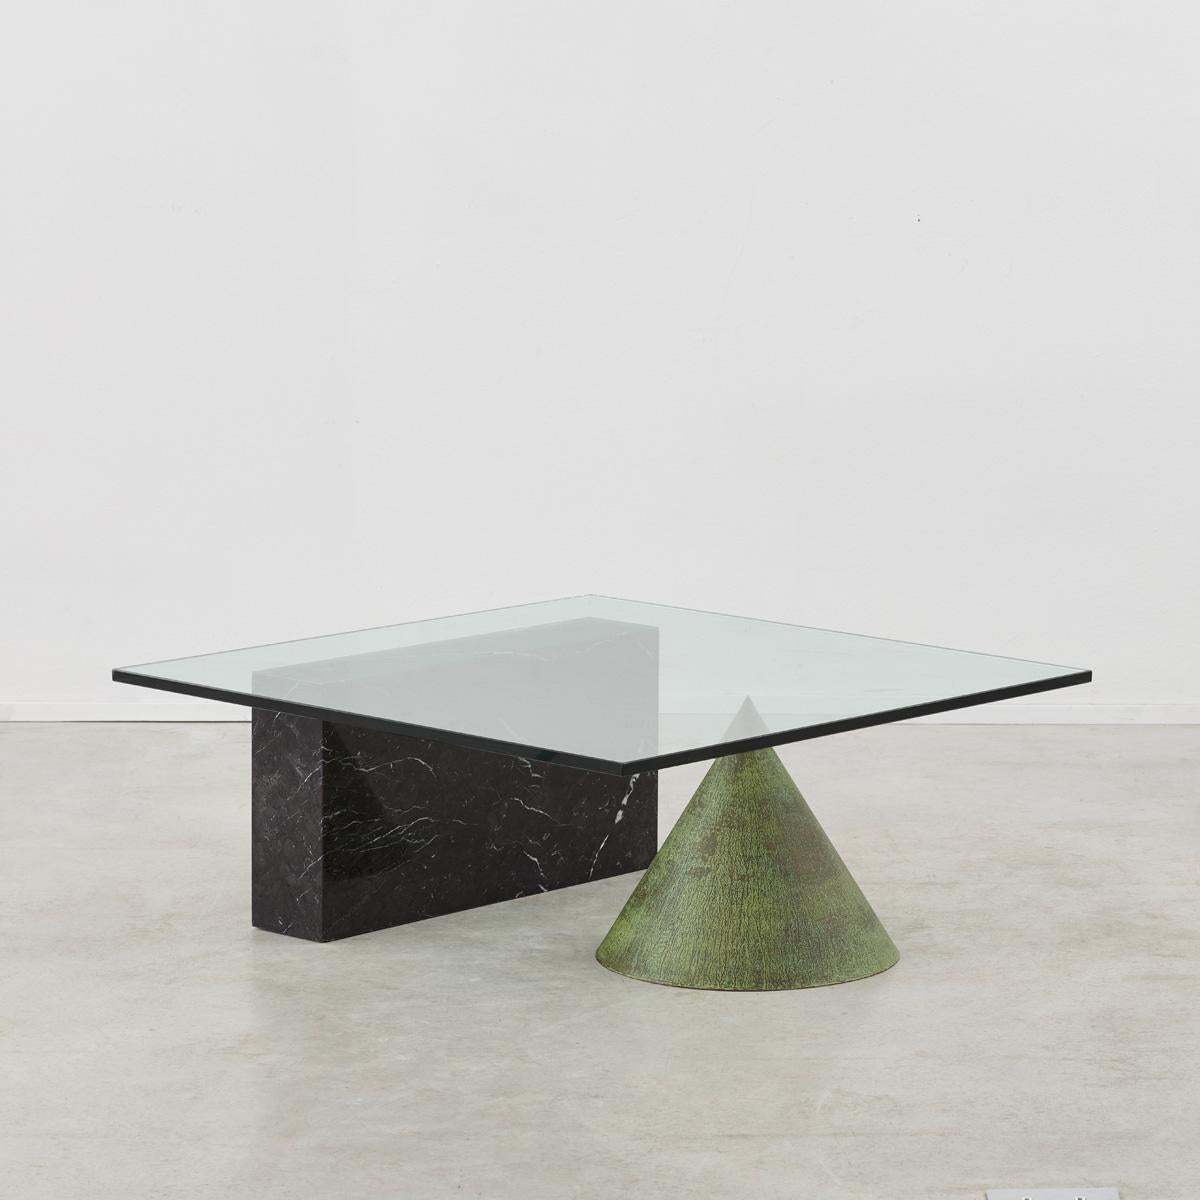 A sculptural Kono coffee table designed by Lella and Massimo Vignelli. A thick sheet of glass appears to precariously balance on a copper cone and marble block, however this illusion is far from the truth. Cleverly designed, taking inspiration from